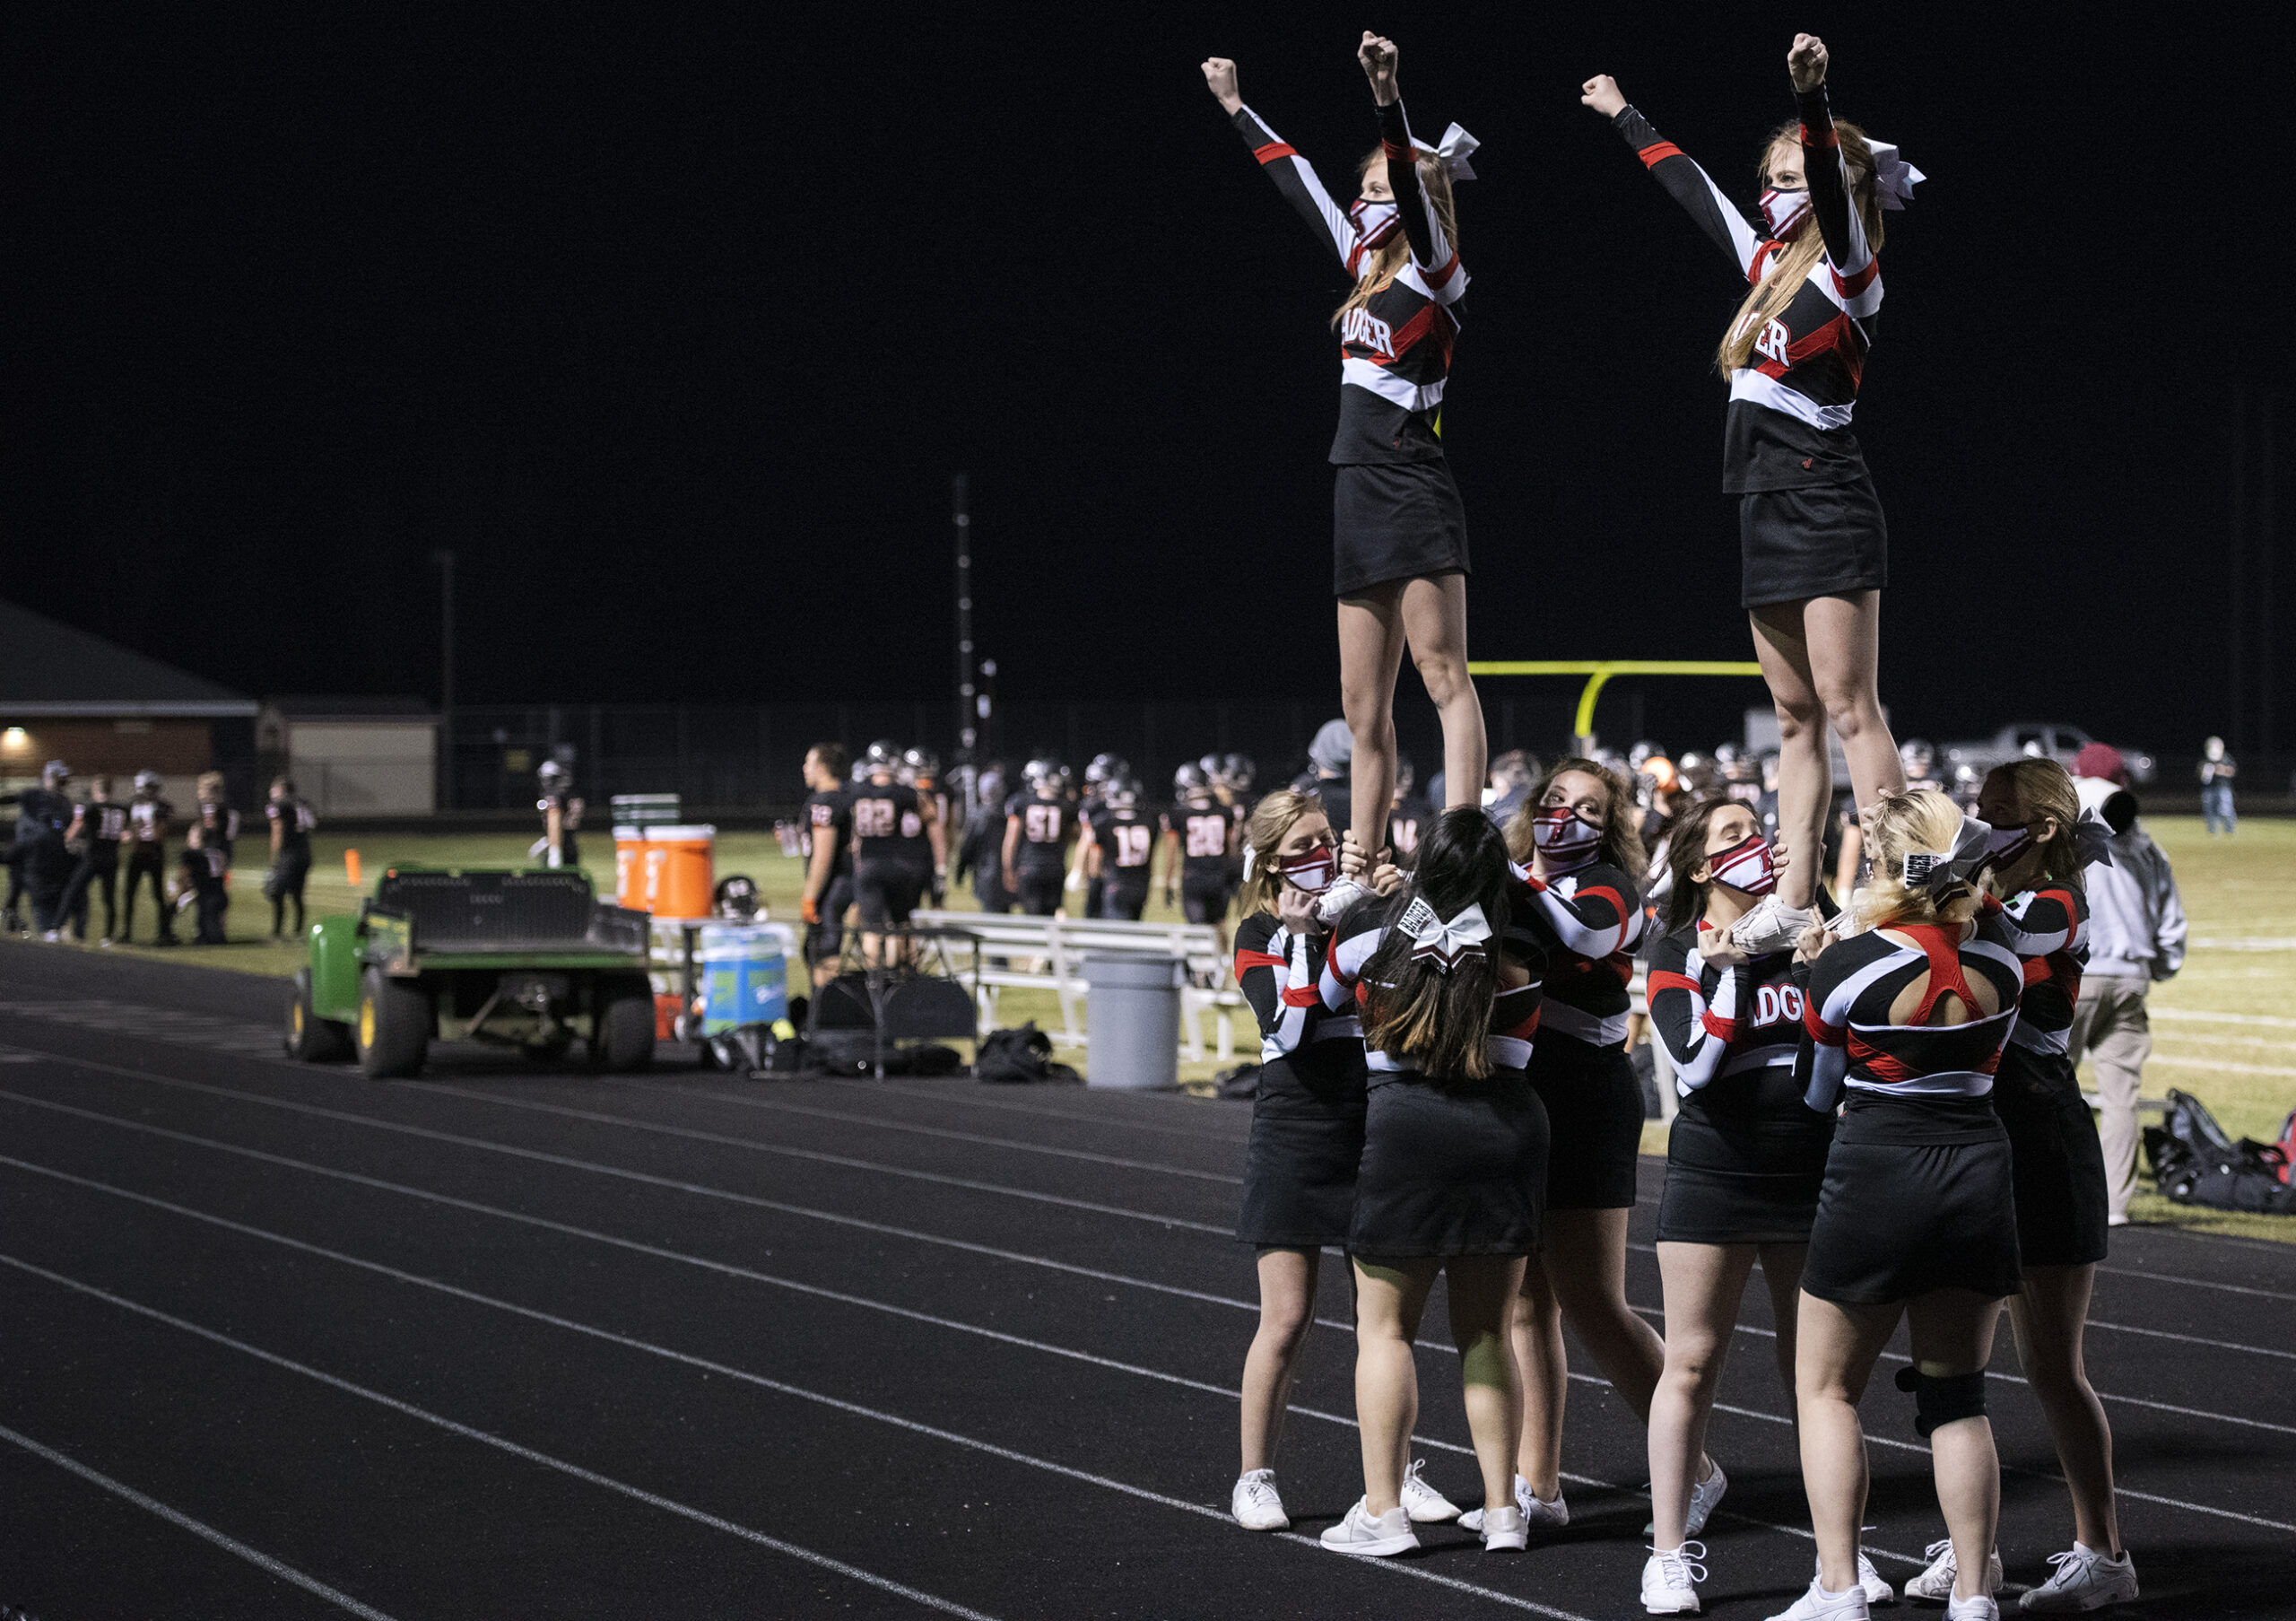 cheerleaders make a formation as they perform on a track surrounding the football field